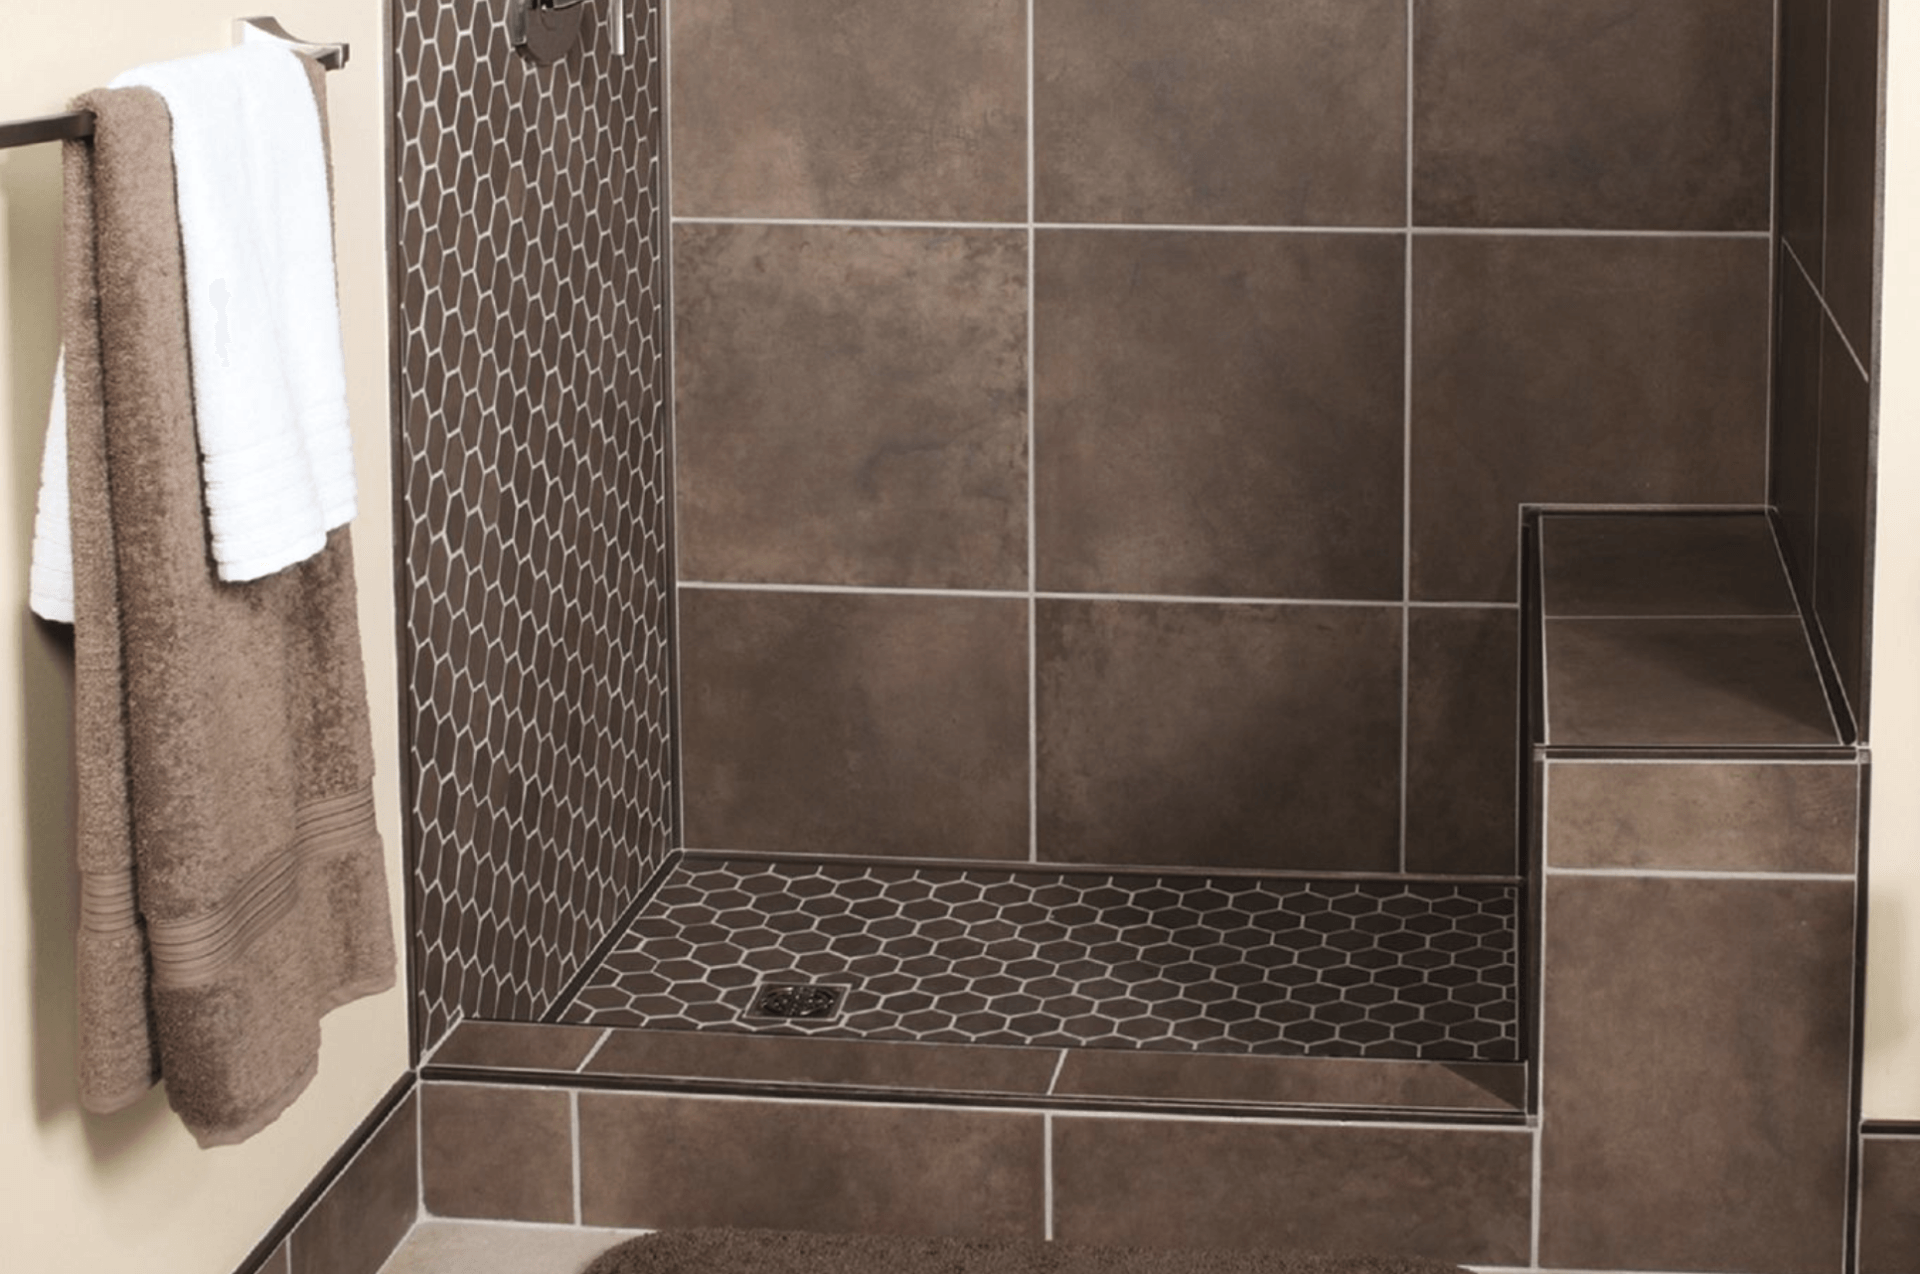 correct shower curb top design